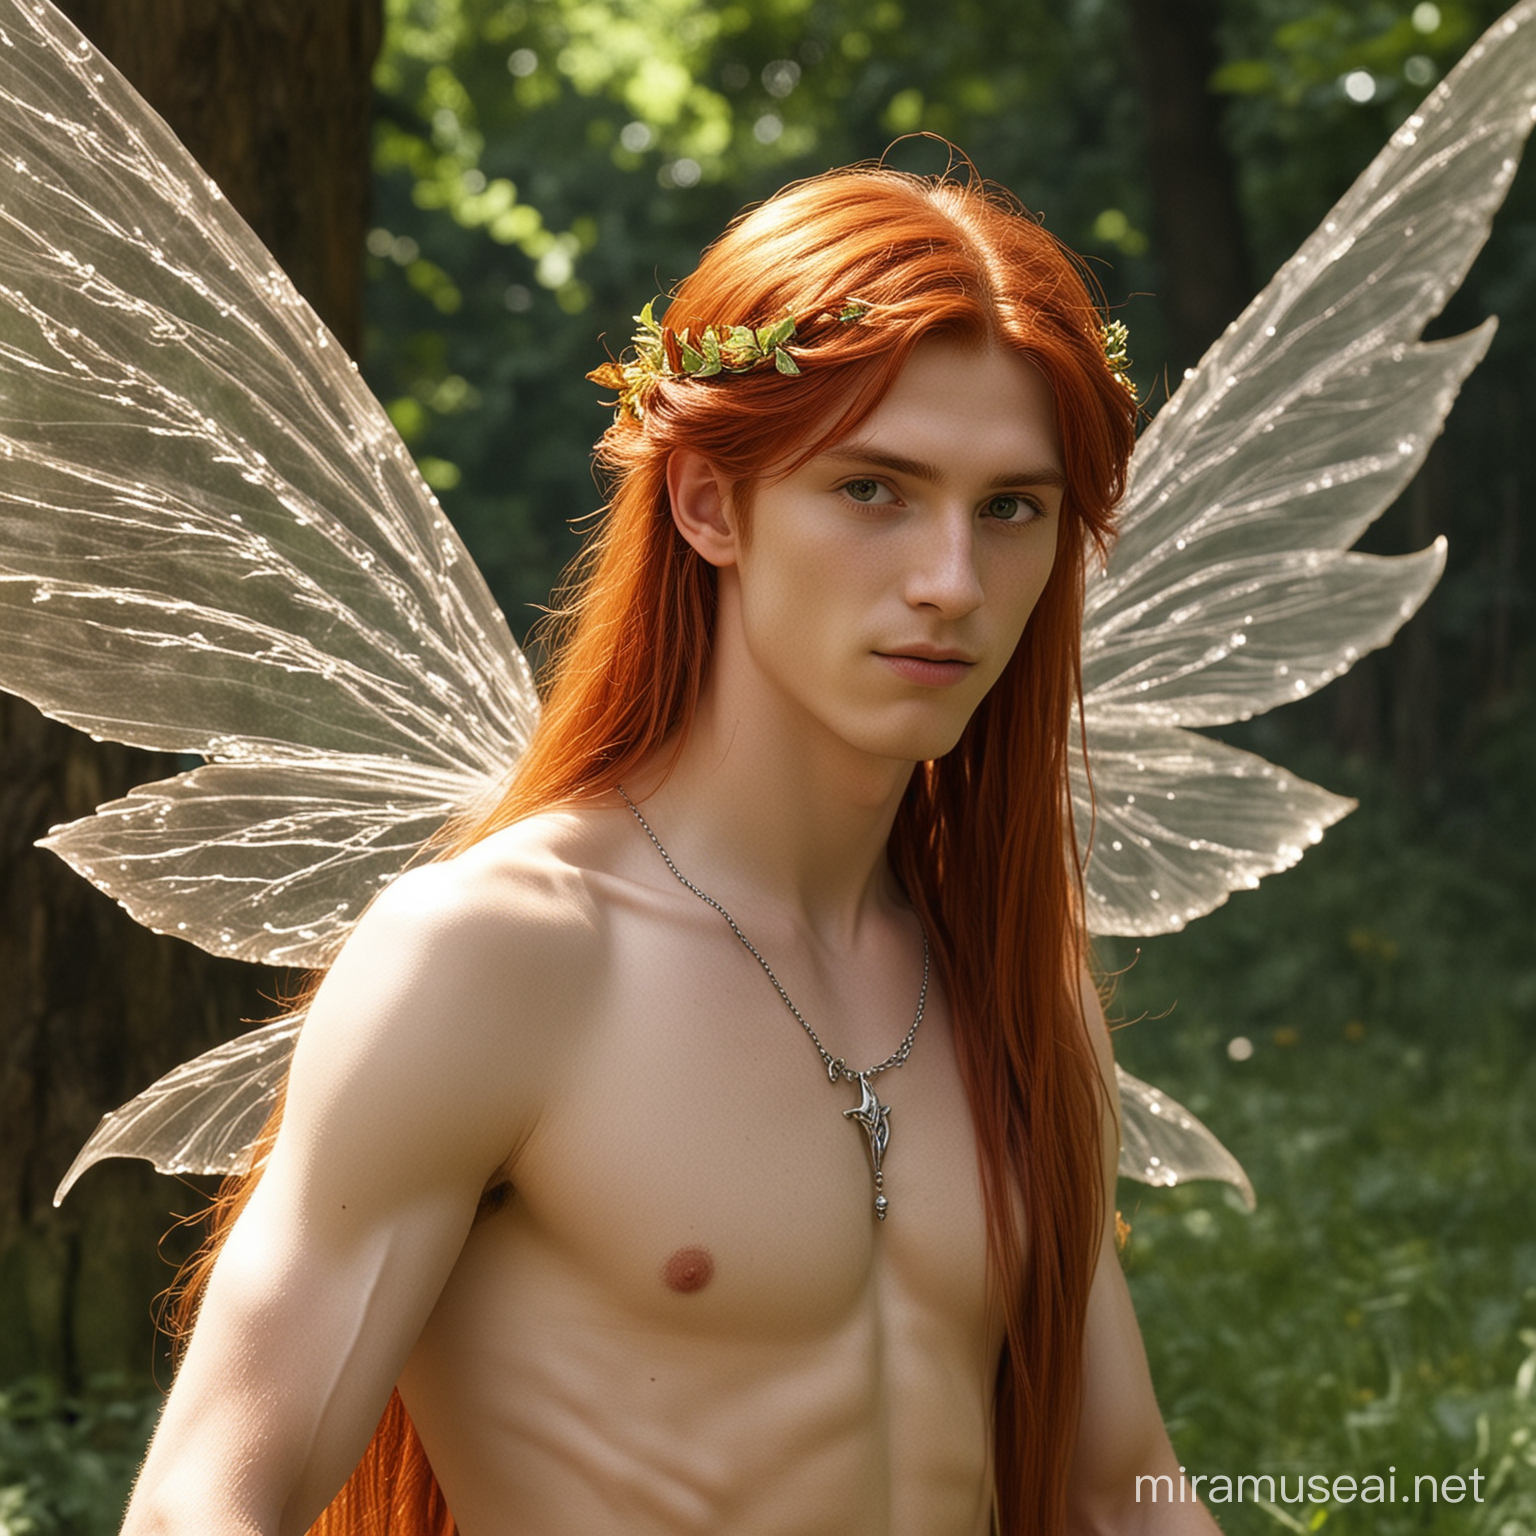 He is fairy and has the appearance of a child. He possesses long red hair and pointed ears, giving him a somewhat feminine look. his eyes were amber and the Commandment mark on his chest. He got gigantic glowing fairy wing